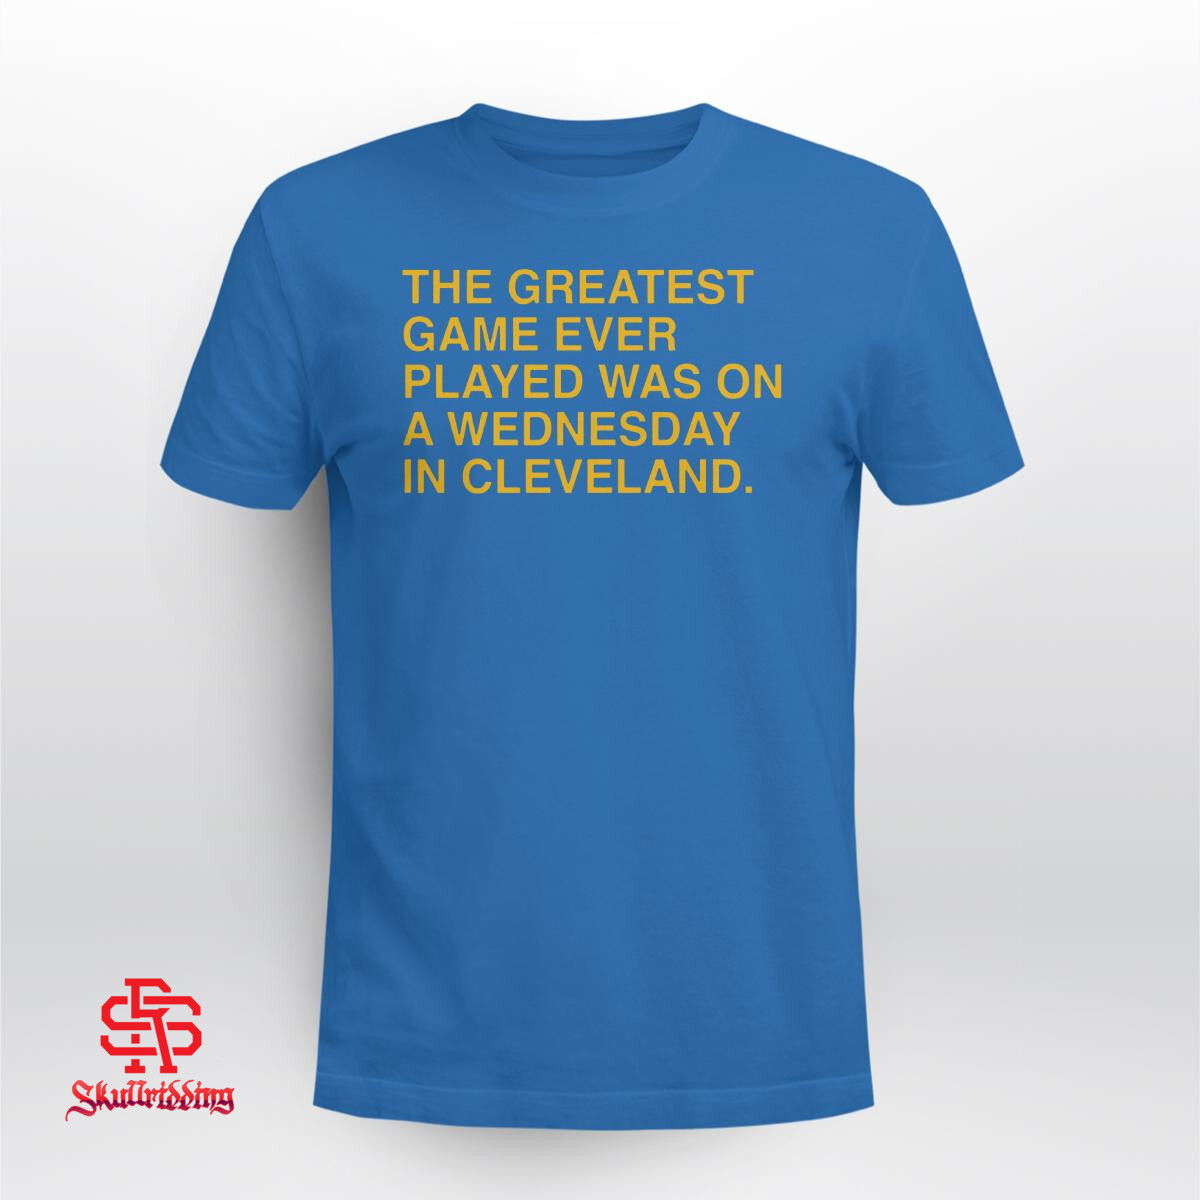 The Greatest Game Ever Played Was On A Wednesday In Cleveland T-Shirt -  Skullridding